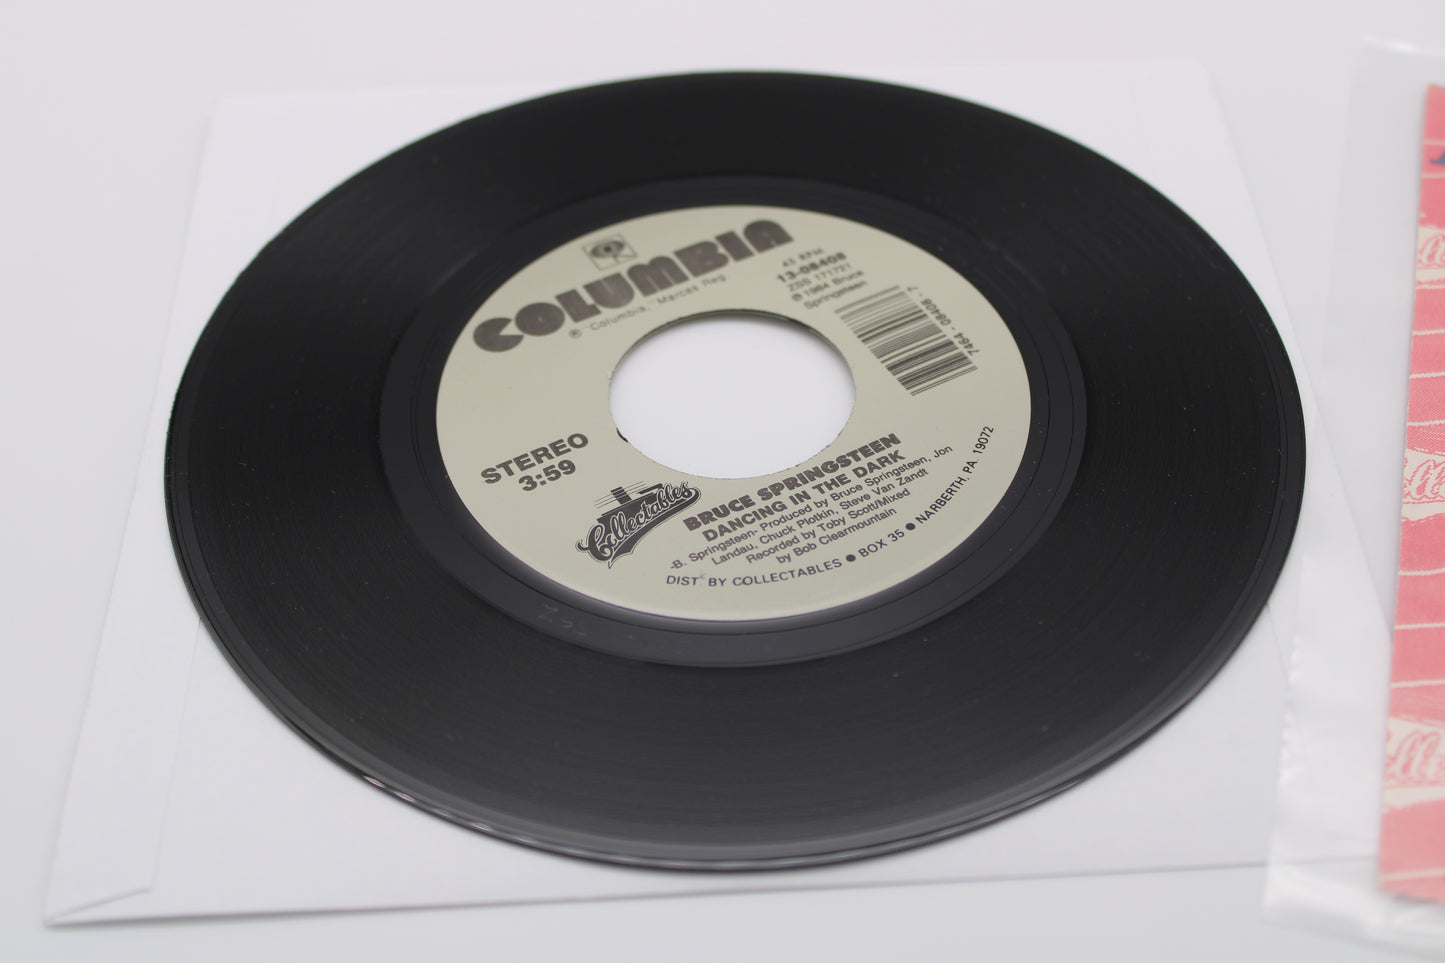 Bruce Springsteen Dancing in the Dark & Pink Cadillac 45 Record "Collectables Collector Series"